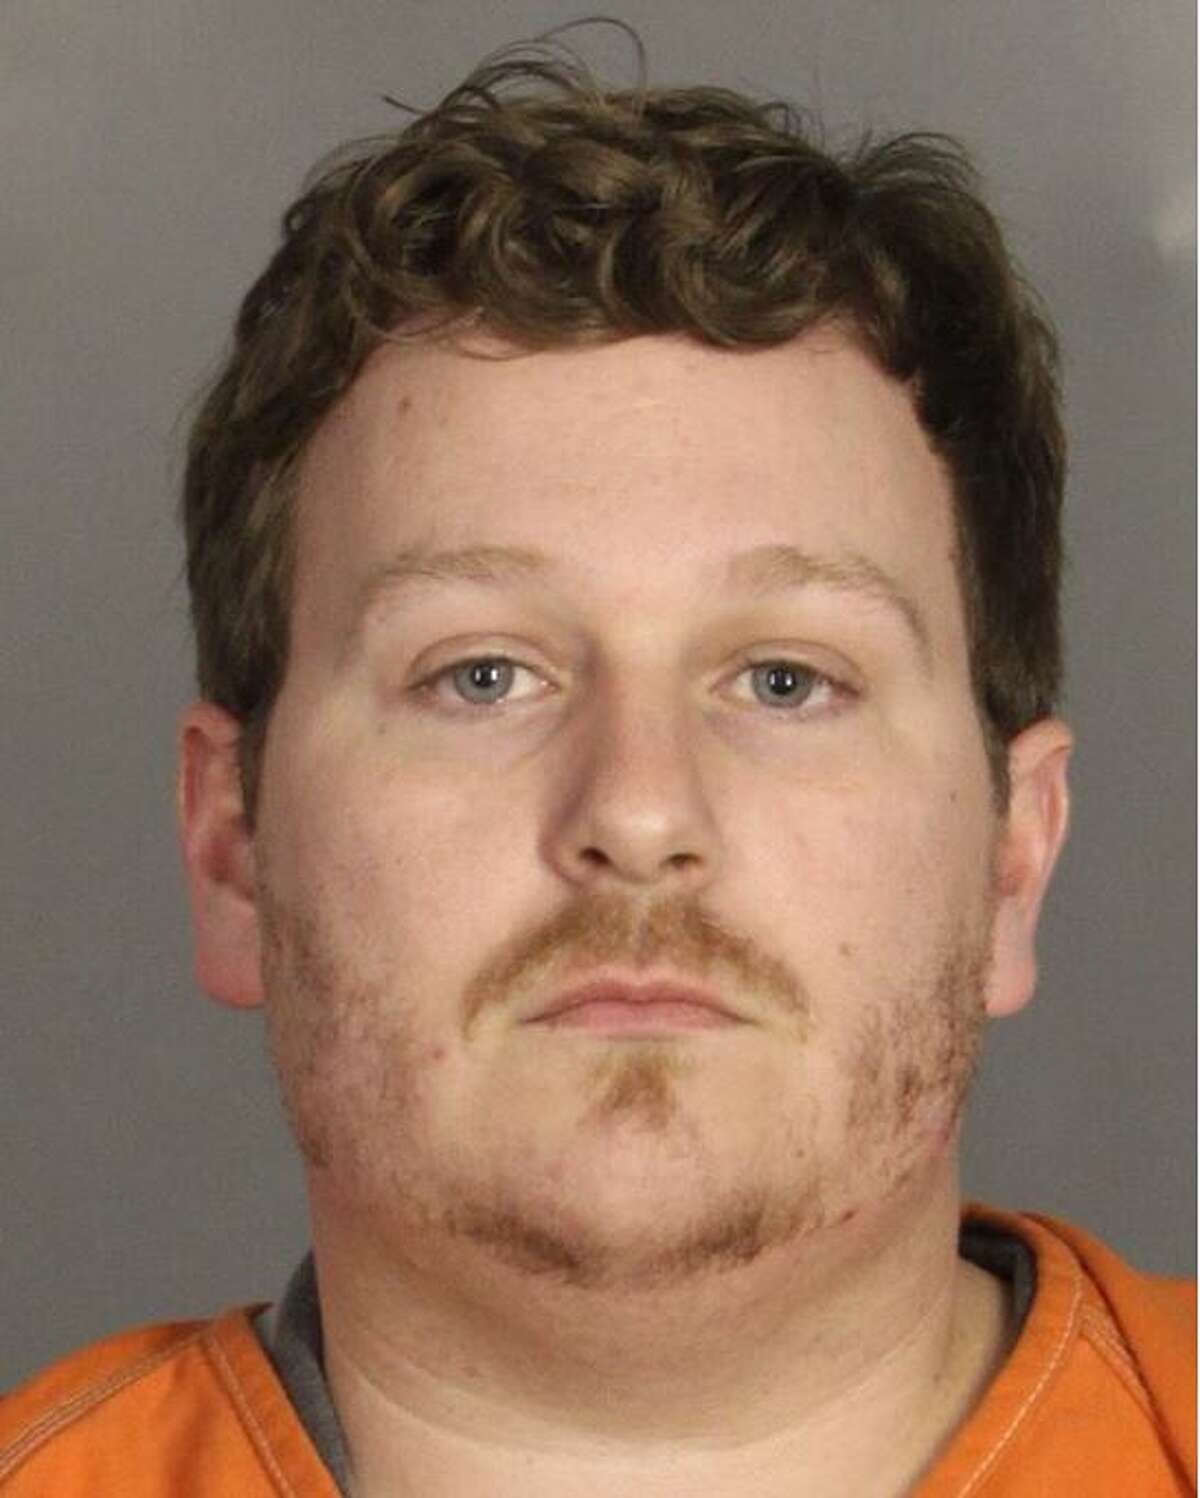 Jason Hodges, a 29-year-old former assistant band director at Waco High School, was arrested Wednesday for allegedly having sexual relations with a female student, the Waco Tribune-Herald reported. Hodges has been charged with having an inappropriate teacher-student relationship, indecency with a child and marijuana possession, according to Waco ISD officials.